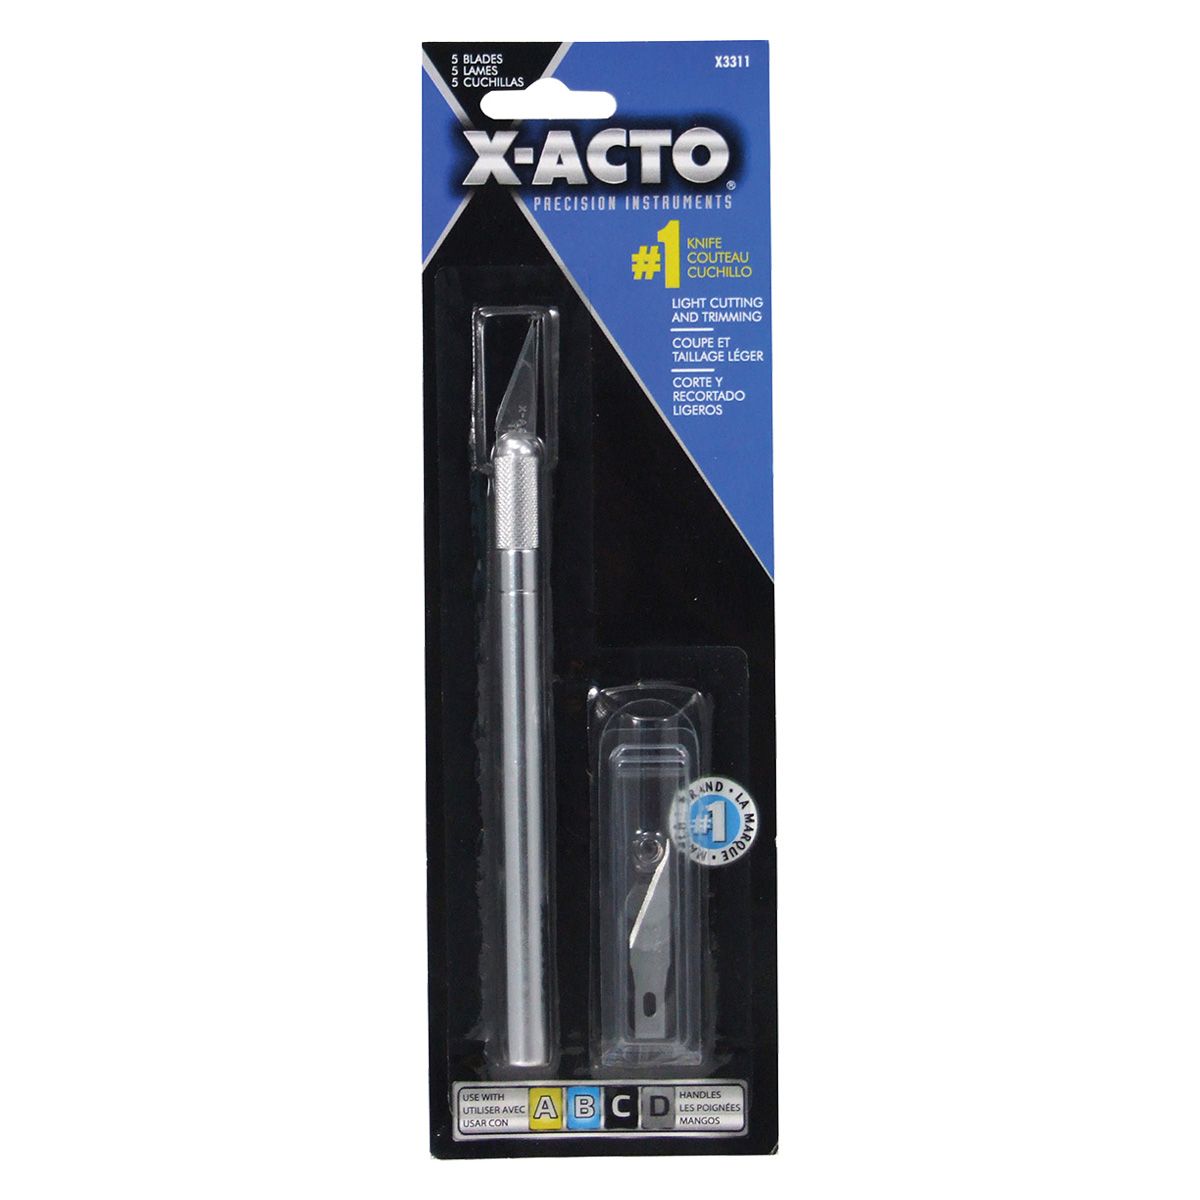 X-Acto #1 Knife with 5 Blades - Aluminum